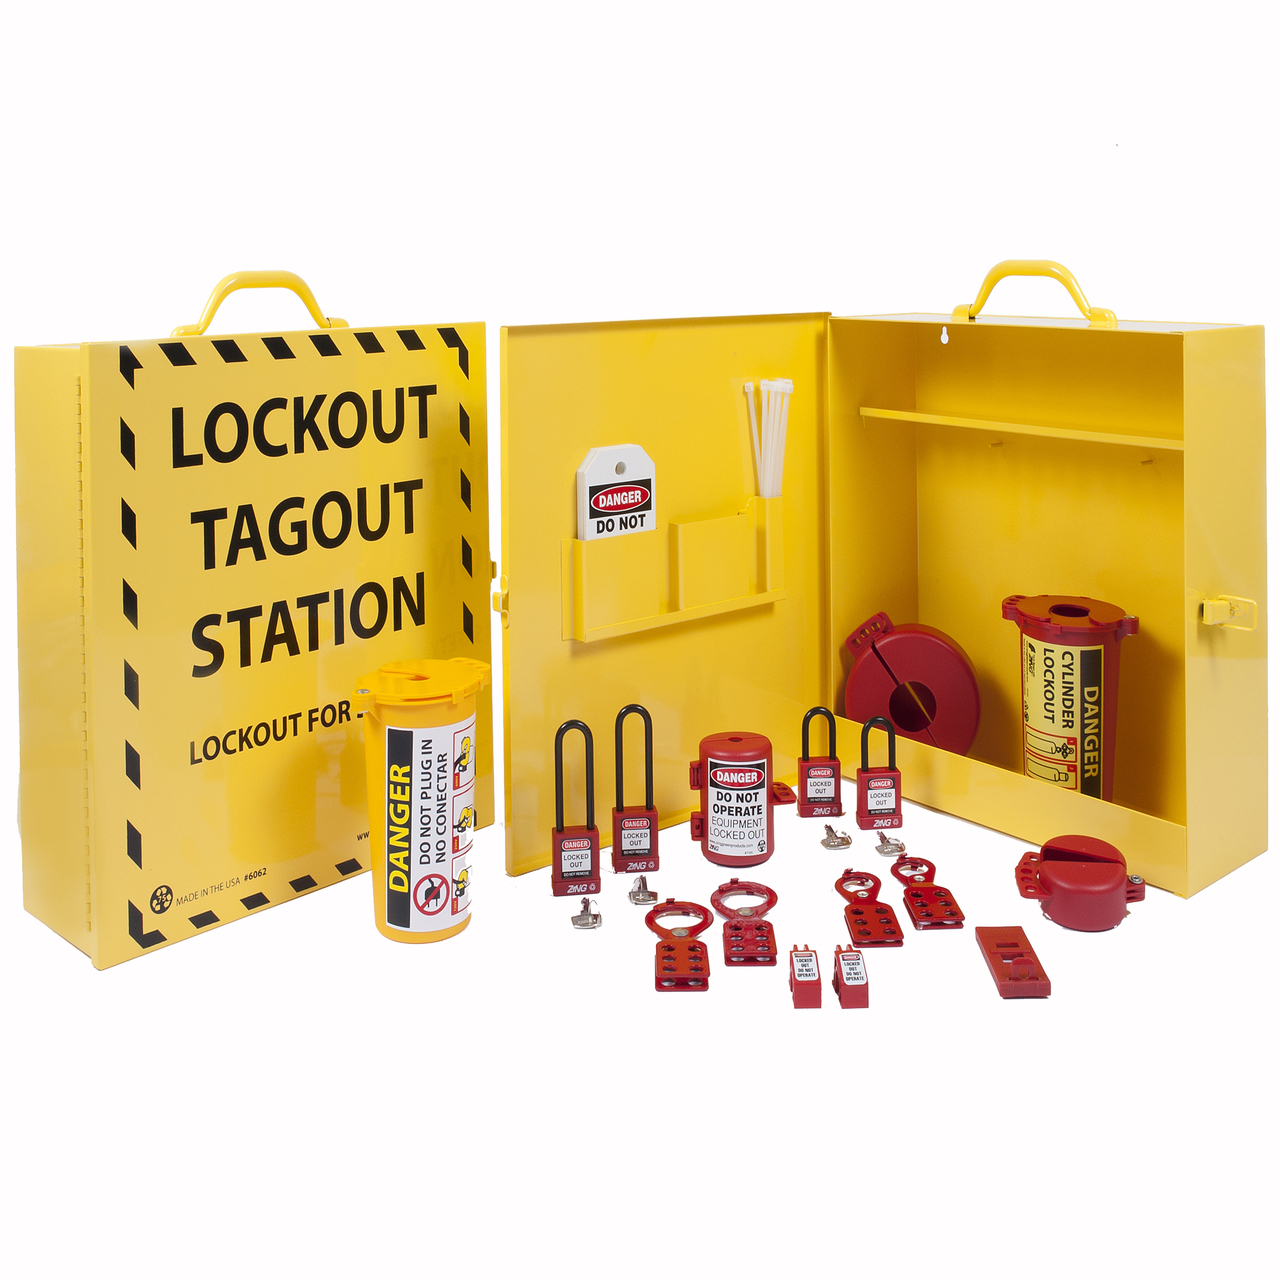 ZING RecycLockout Lockout Cabinet - Stocked